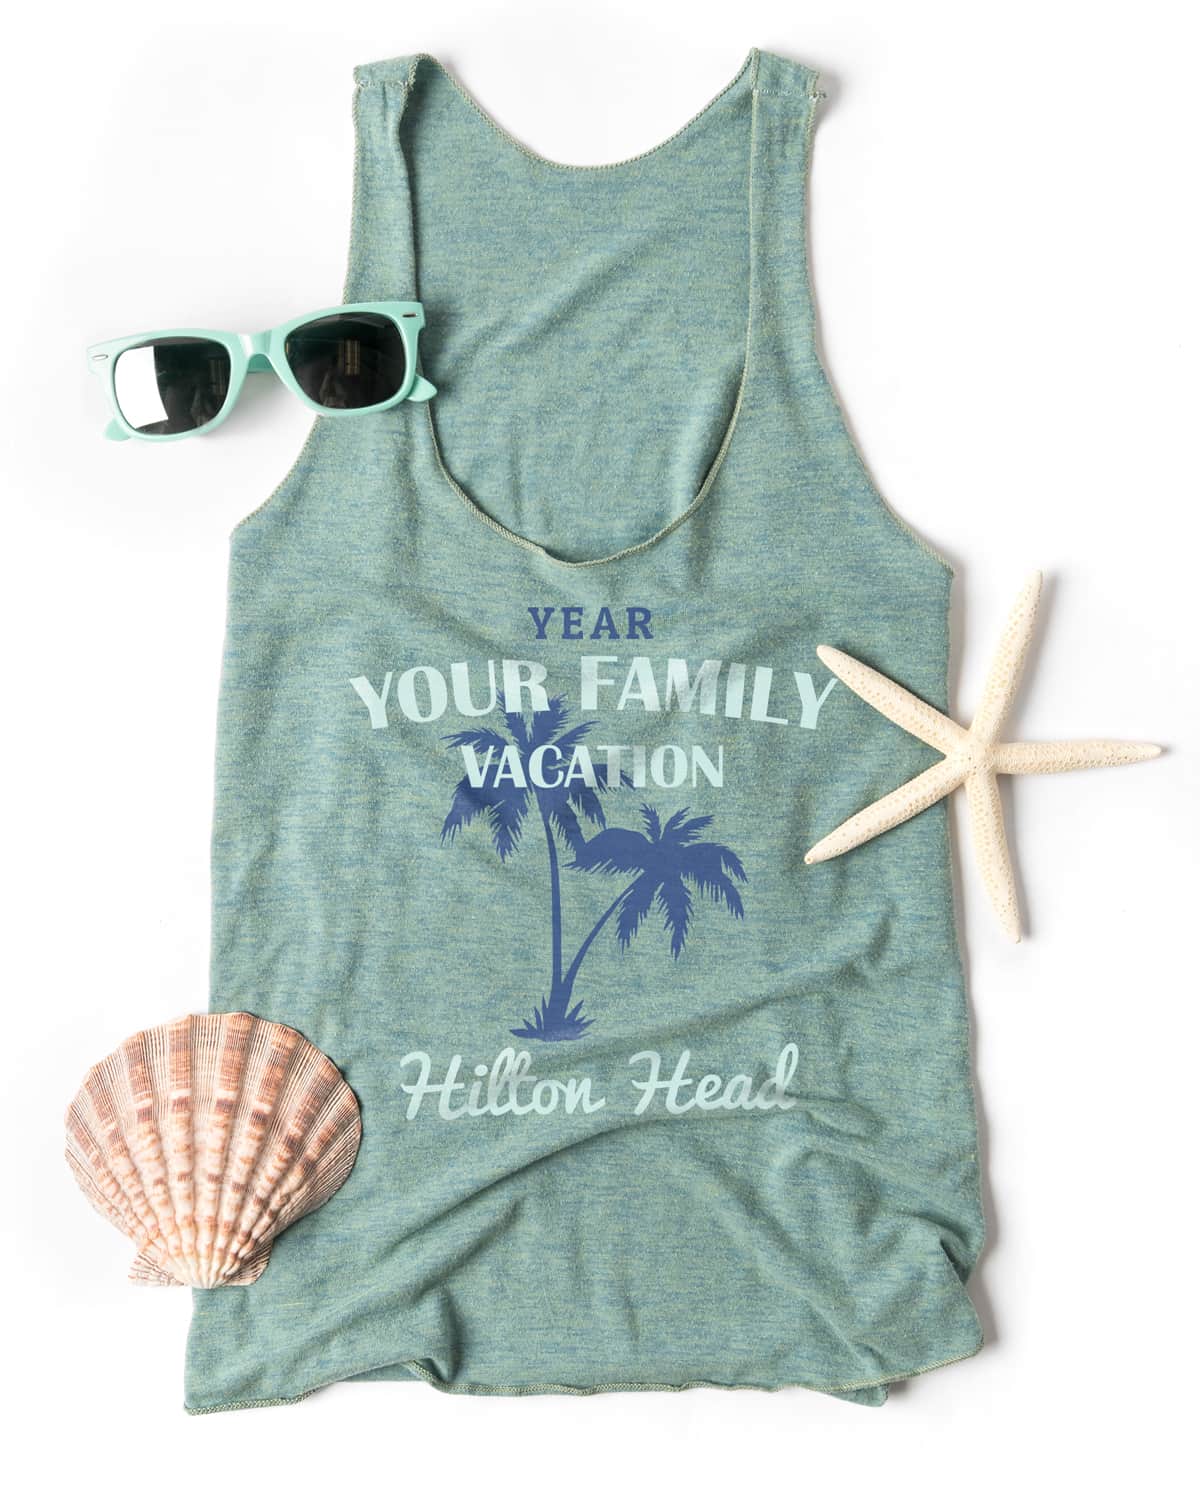 An example family vacation t-shirt design that's beach themed.